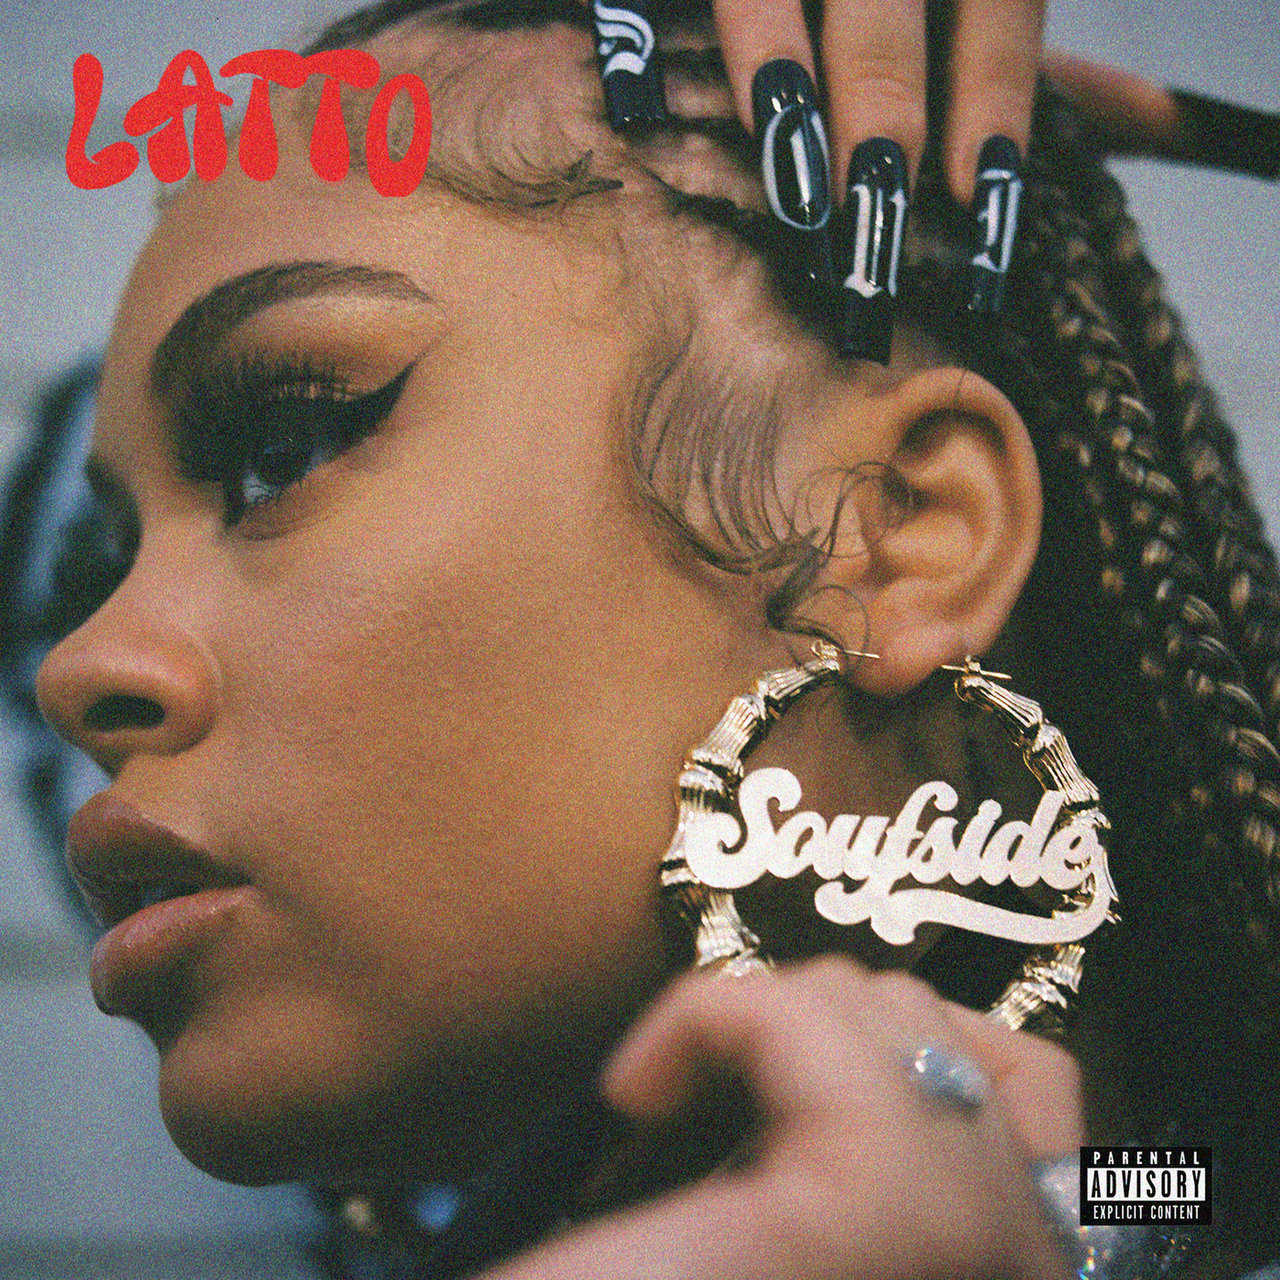 Latto Takes Listeners On A Tour Of Clayton County, Georgia In New Single “Soufside”